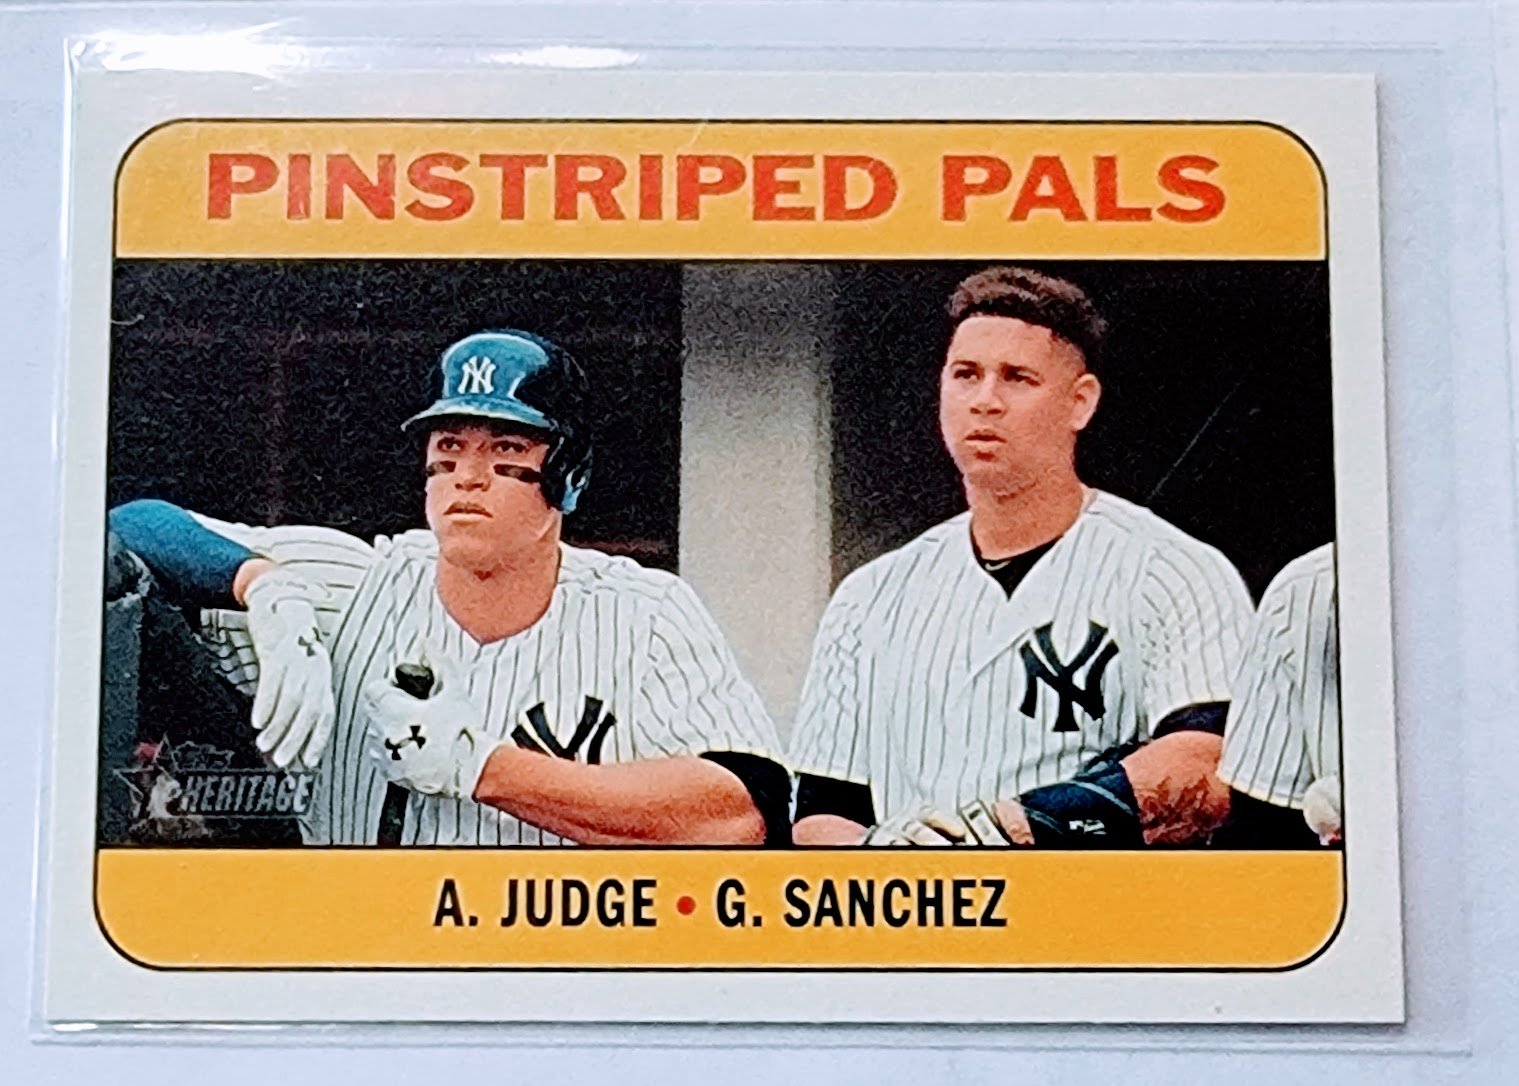 2018 Topps Heritage Aaron Judge & Gary Sanchez Pinstripe Pals Insert Baseball Card TPTV simple Xclusive Collectibles   